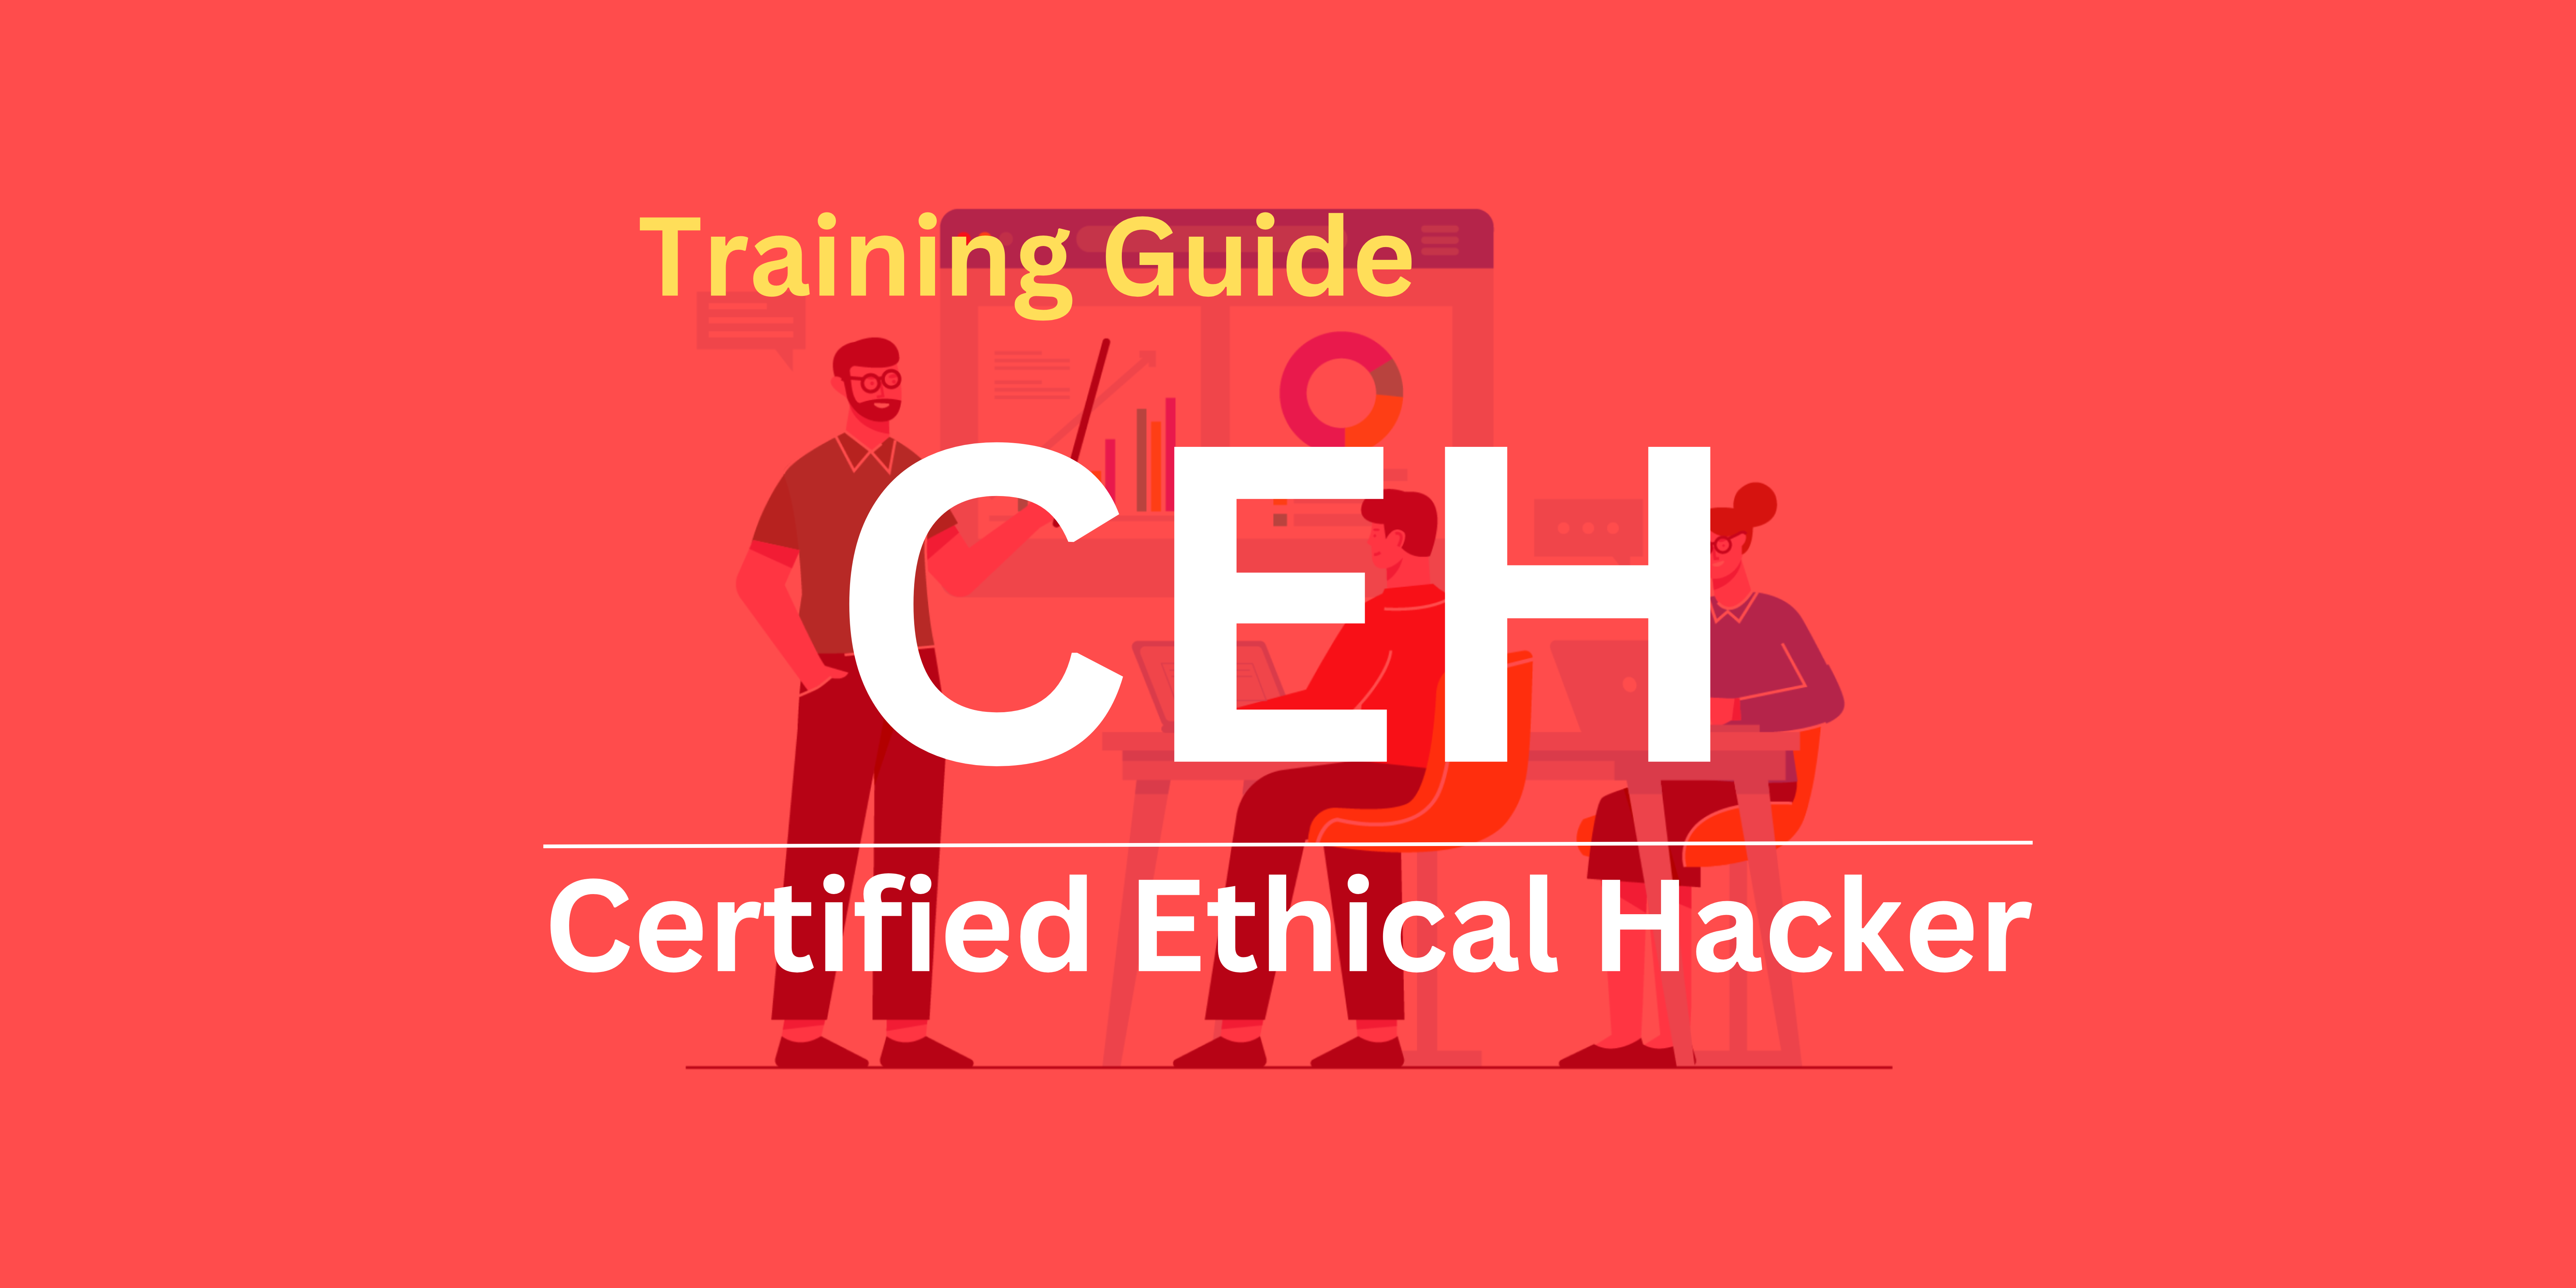 CEH Certification Guide to be a Certified Ethical Hacker